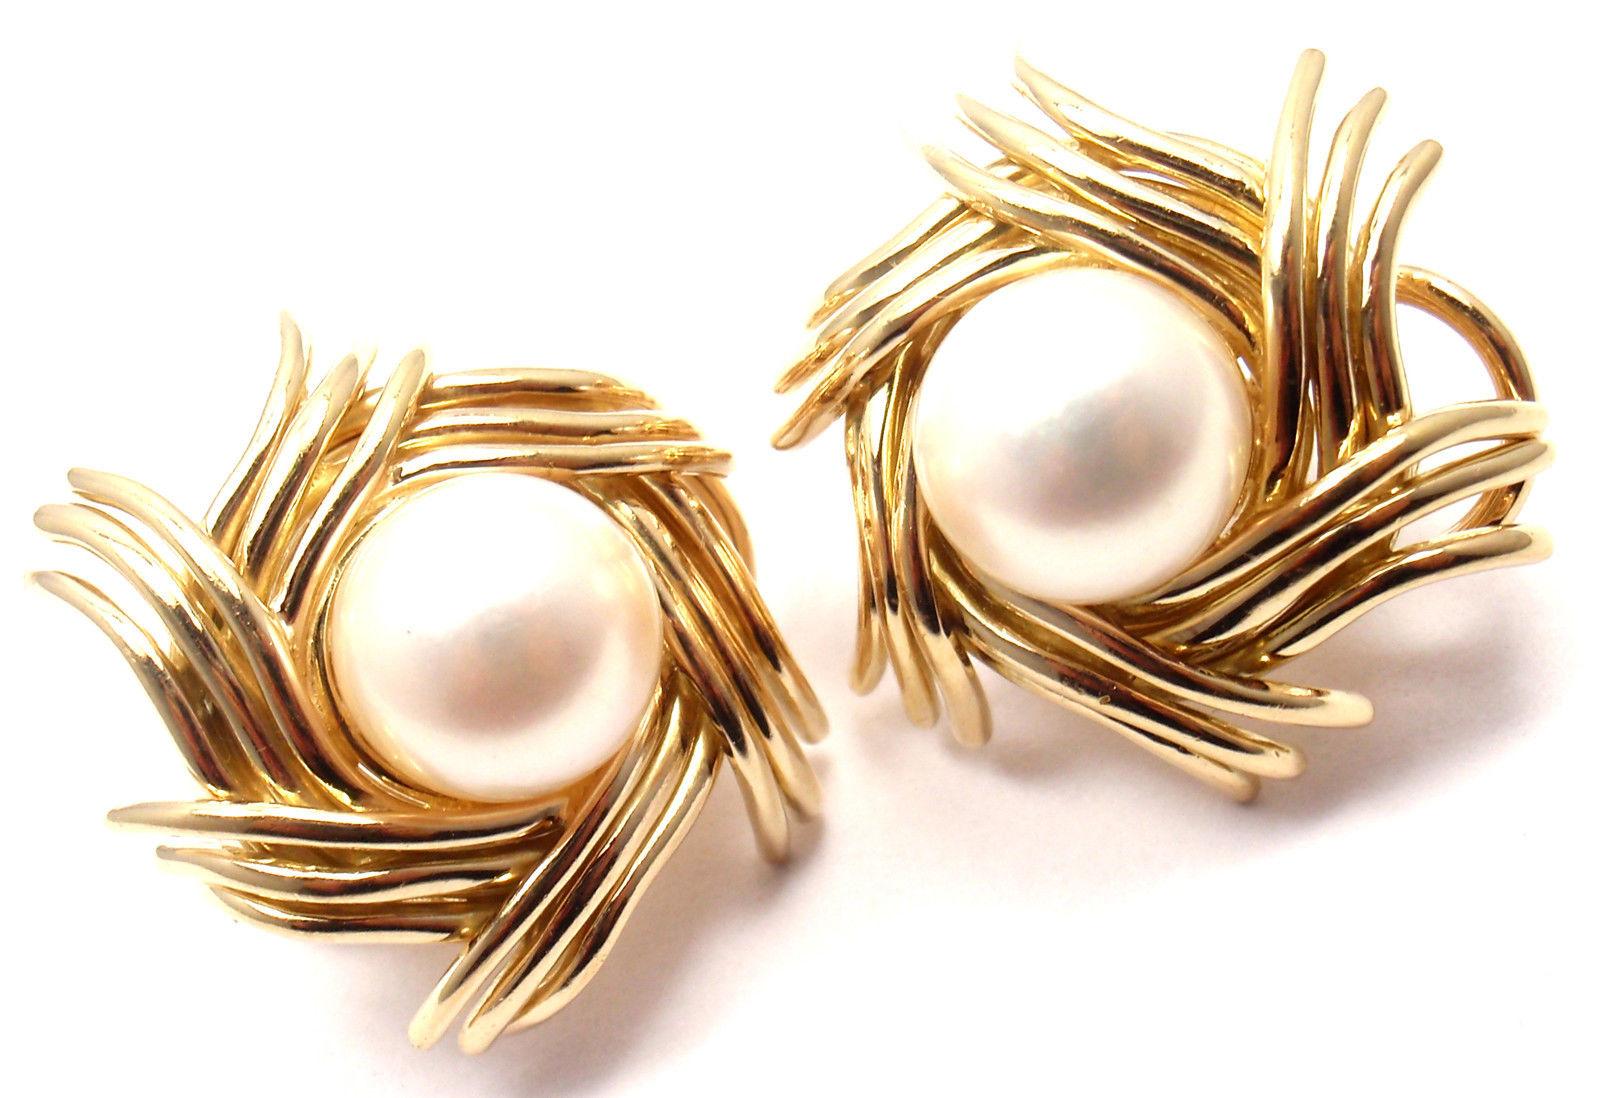 18k Yellow Gold Pearl by Jean Schlumberger Earrings for Tiffany & Co. 
With two 9mm cultured pearls. 
These earrings are for pierced ears.

Details: 
Length: 23mm
Width: 22mm
Weight: 22.5 grams
Stamped Hallmarks: Tiffany & Co Schlumberger 750
*Free